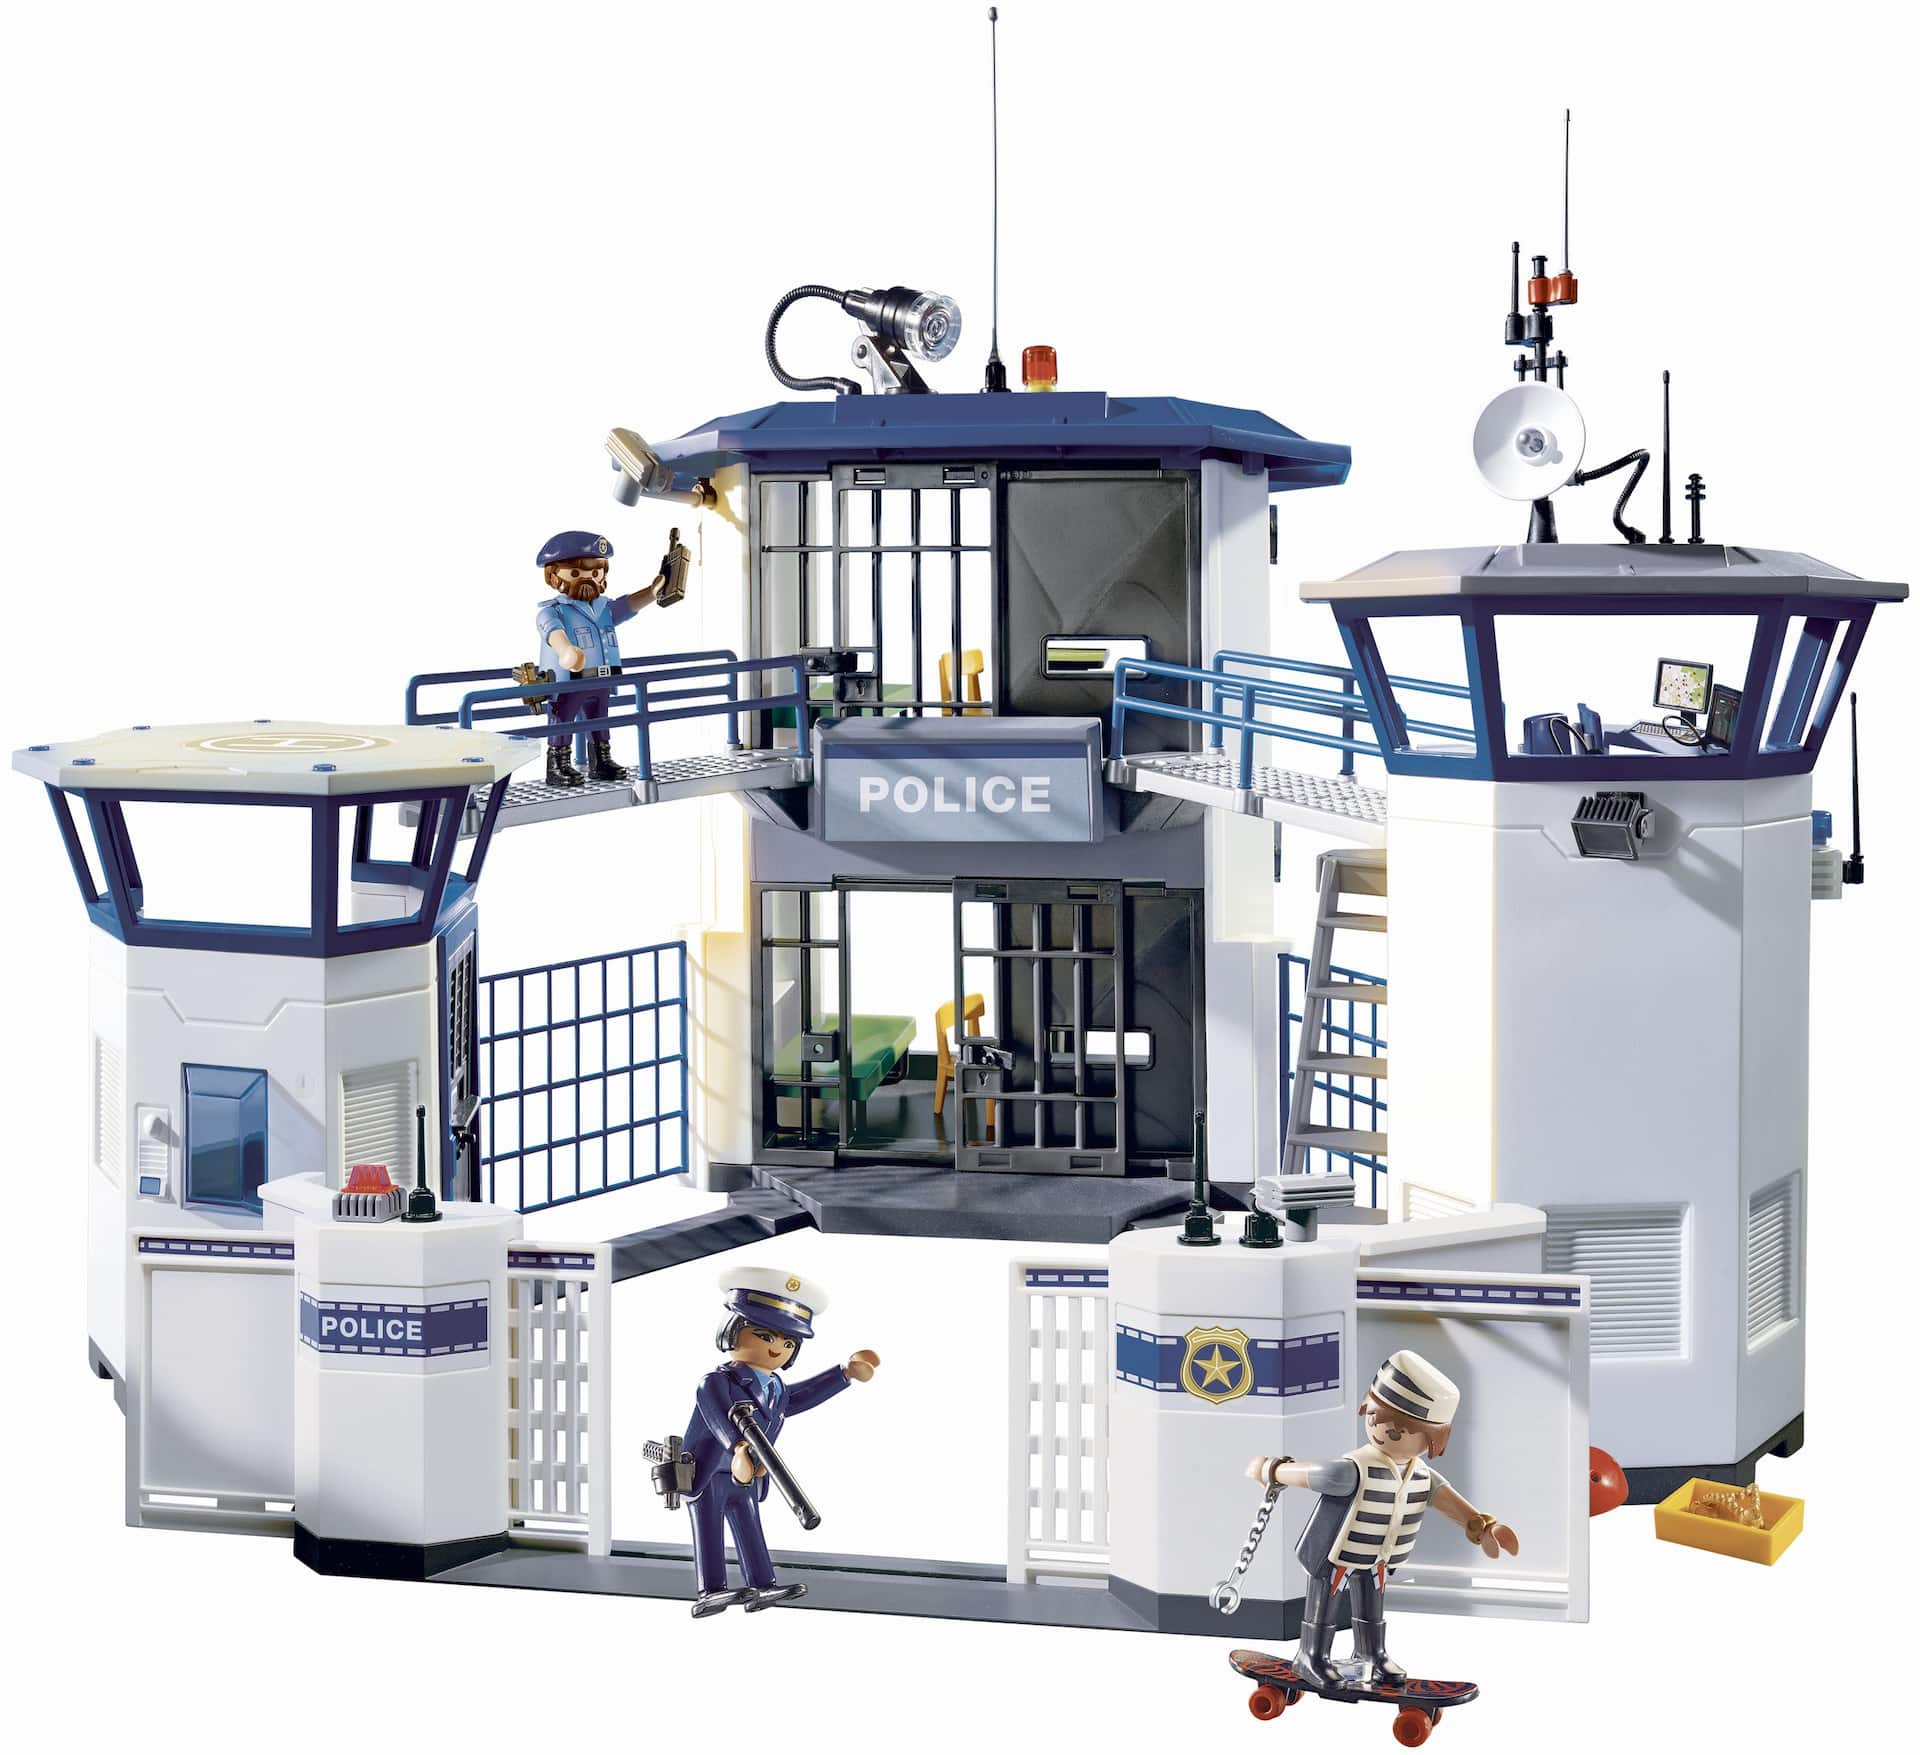 Playmobil Police Headquarters With Prison 9204ccf2 182f 4b84 Af9c 71652e29b398 Jpgrendition 